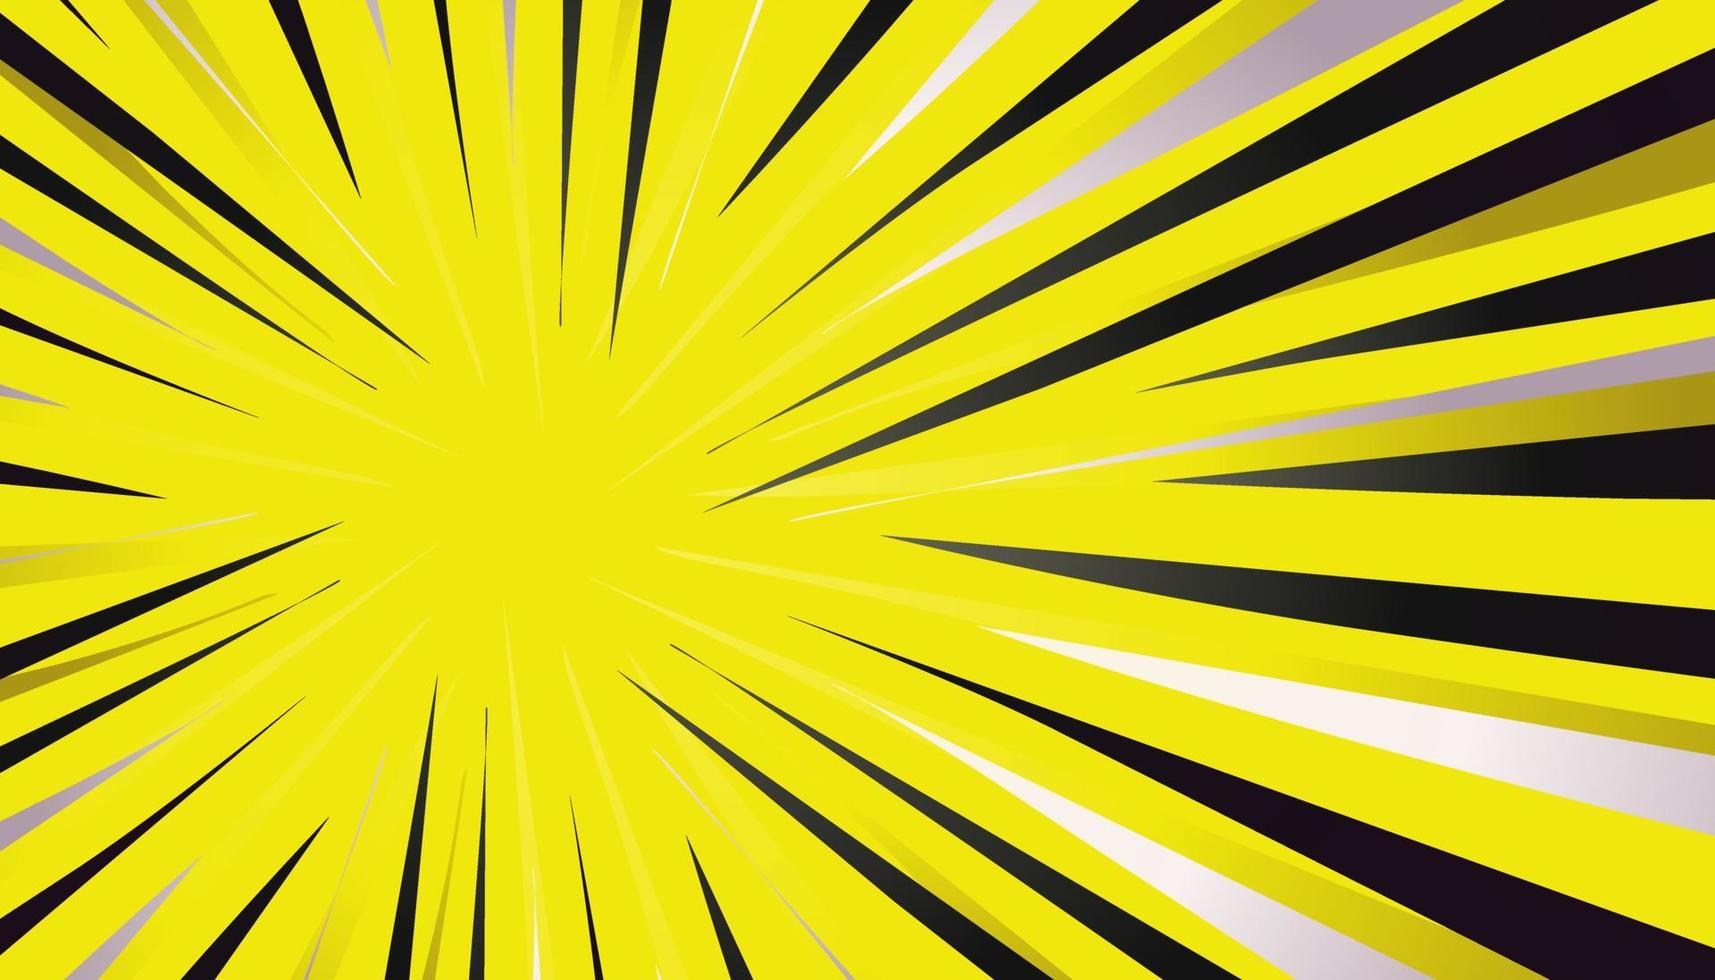 Yellow background vector illustration with comic theme. Perfect for comic backgrounds, banners, posters, stickers